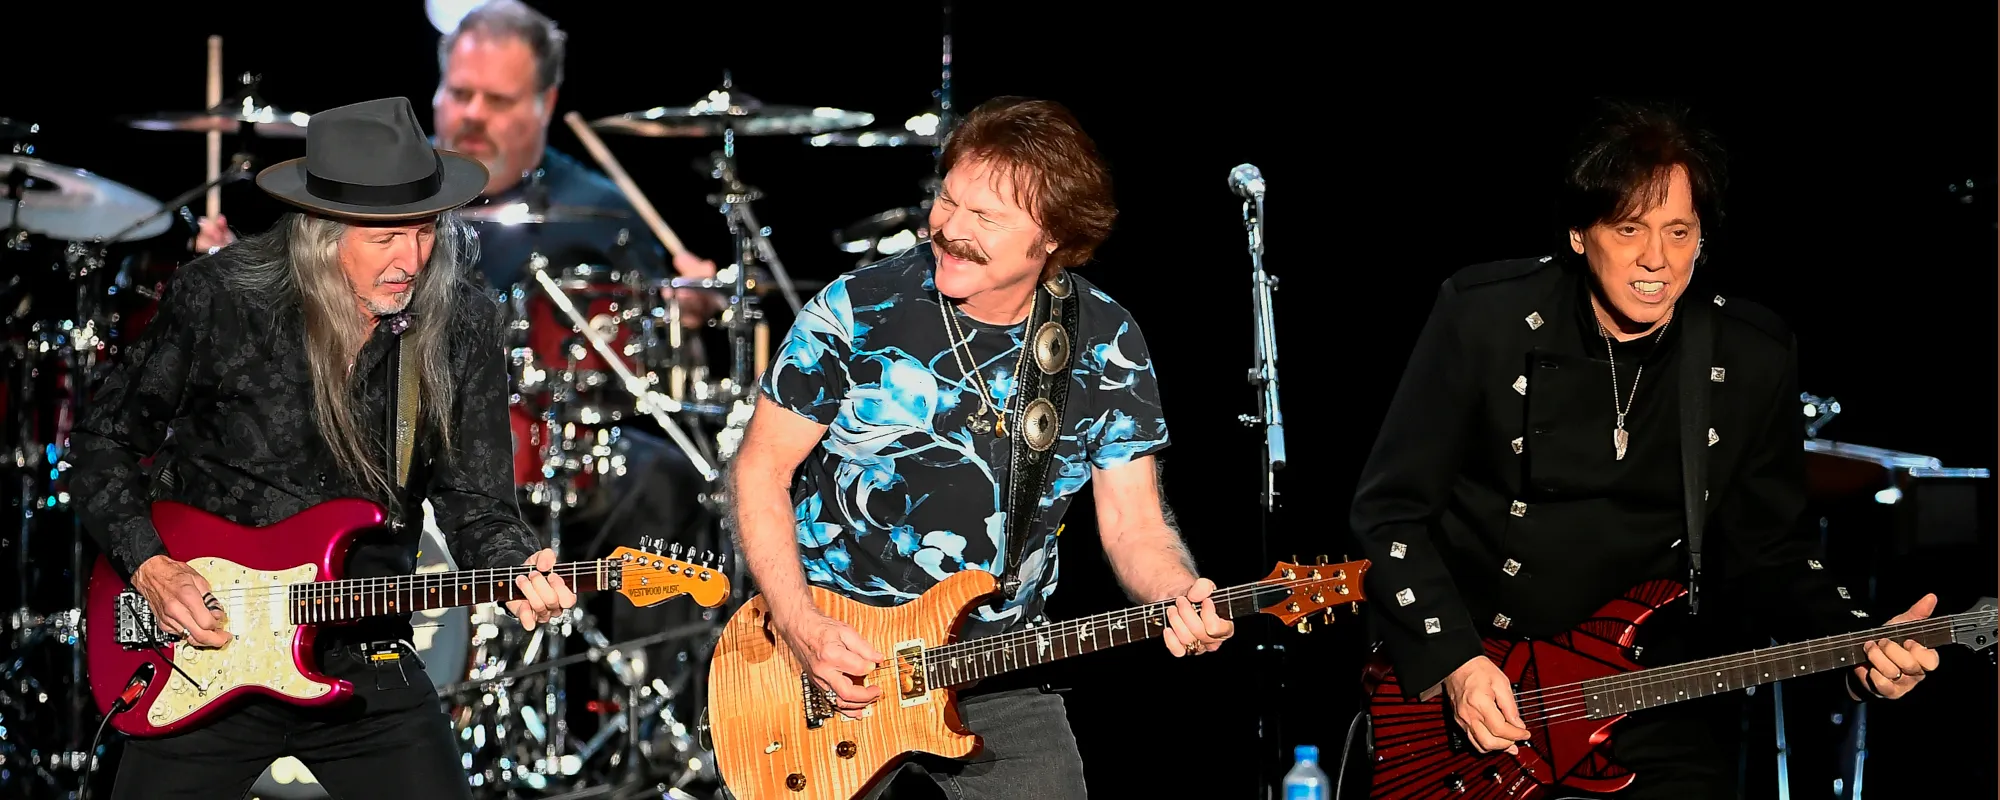 The Doobie Brothers Extend 50th Anniversary Tour in 2023